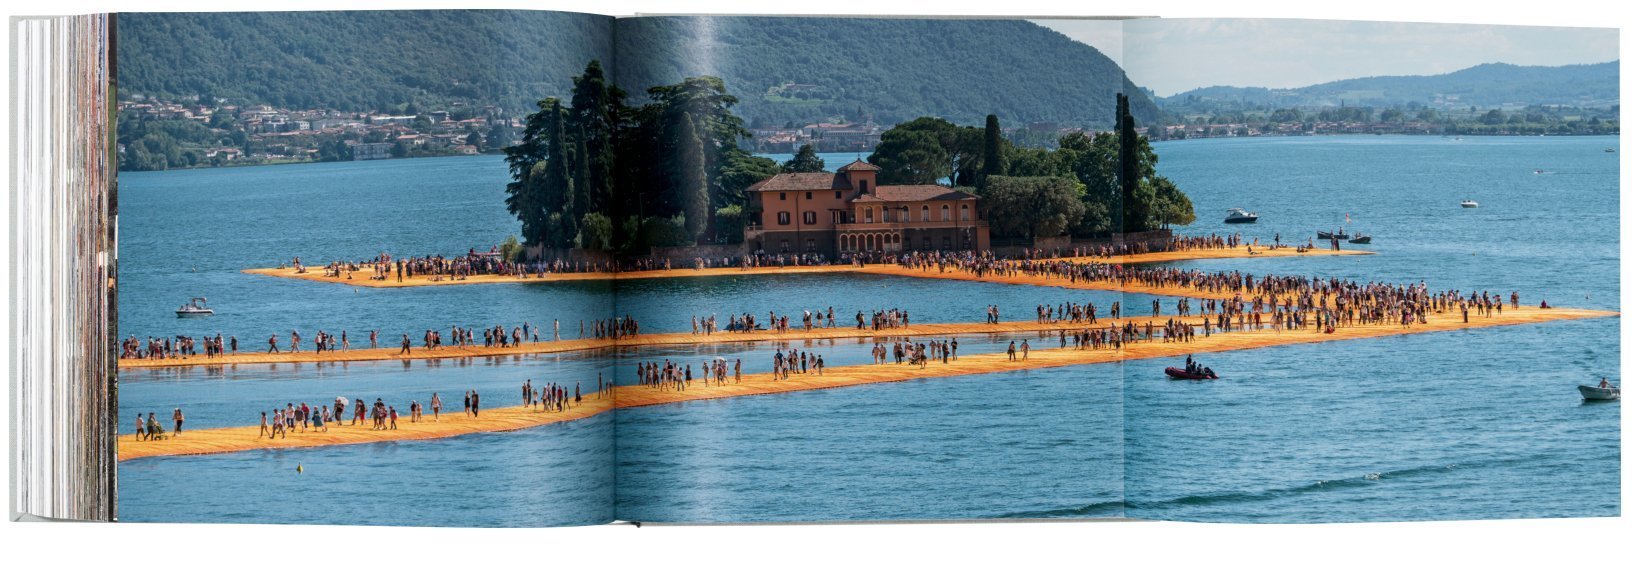 Christo and Jeanne-Claude. The Floating Piers (Limited Edition